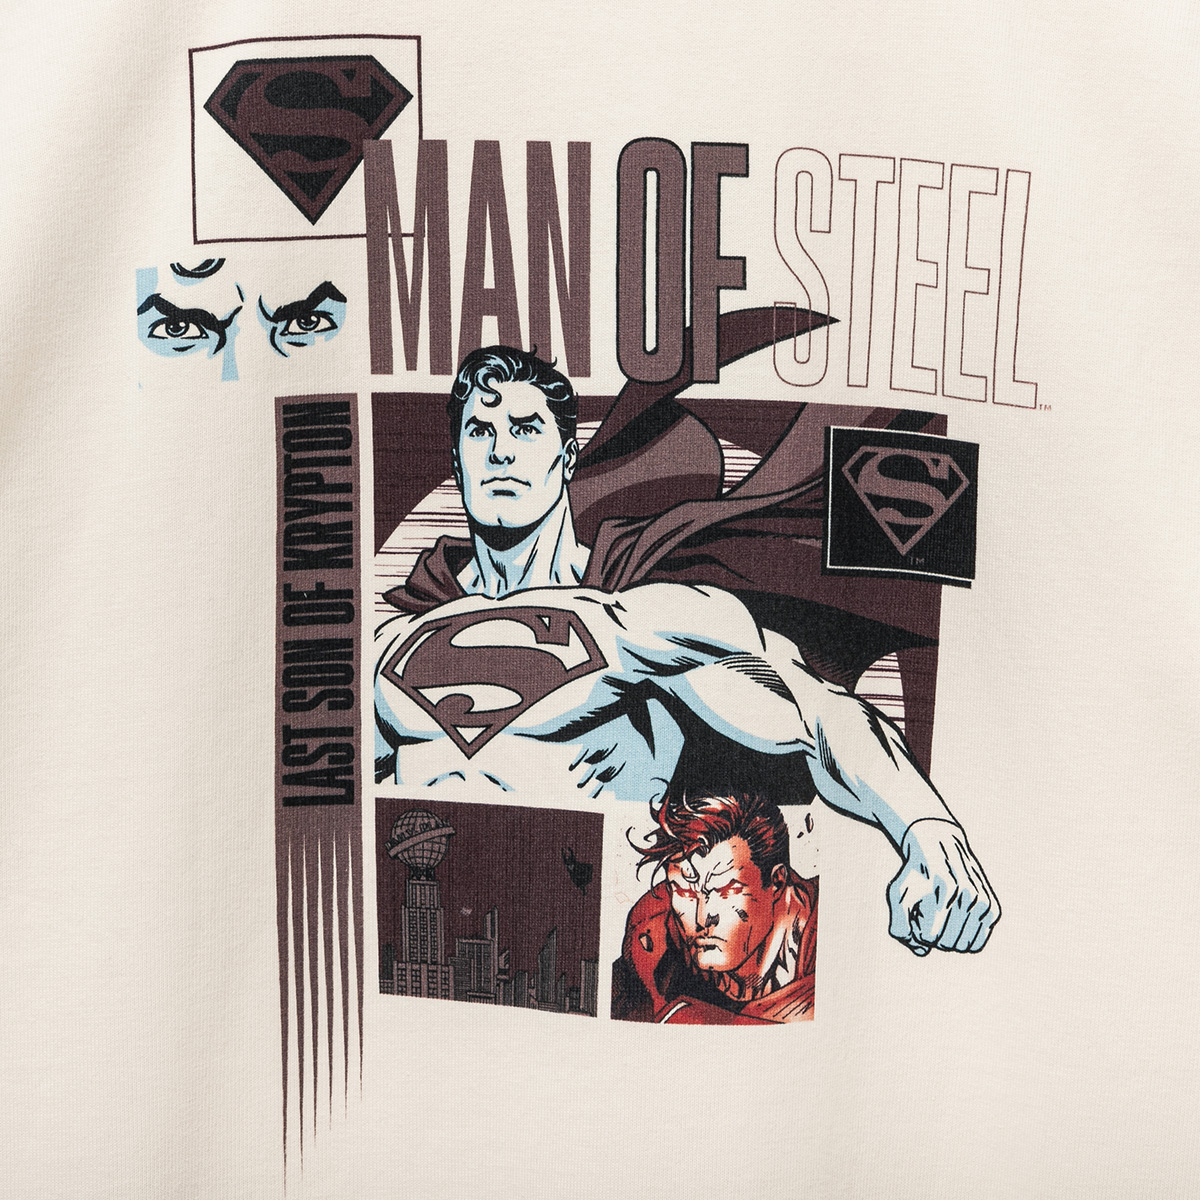 WARNER BROTHERS 100TH JUSTICE LEAGUE SUPERMAN IVORY SHORT SLEEVE T-SHIRT